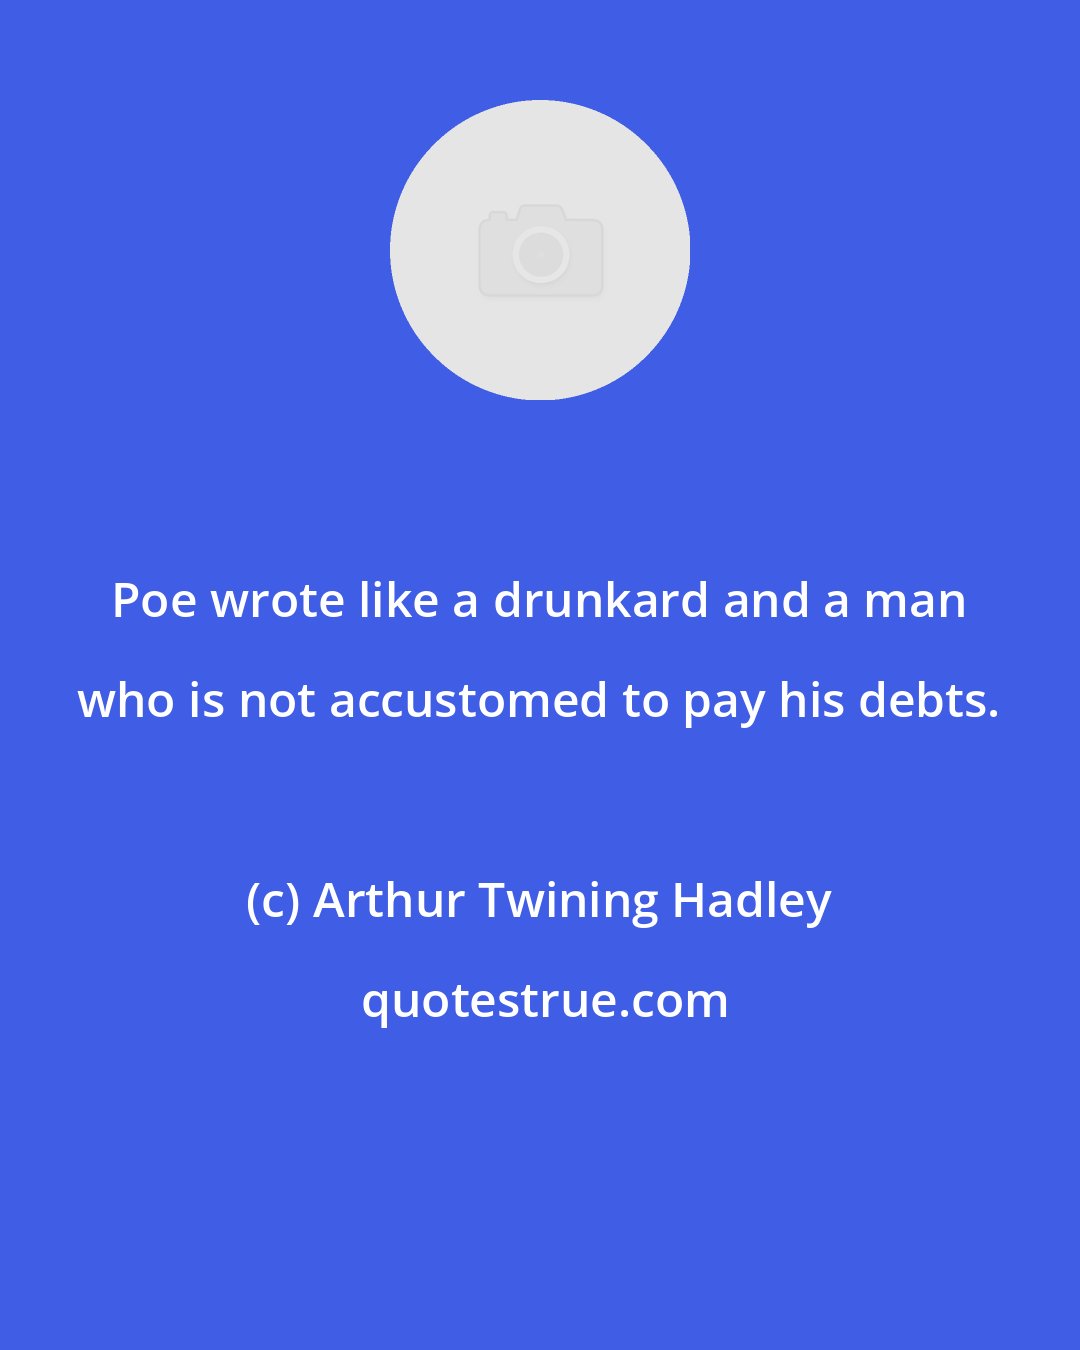 Arthur Twining Hadley: Poe wrote like a drunkard and a man who is not accustomed to pay his debts.